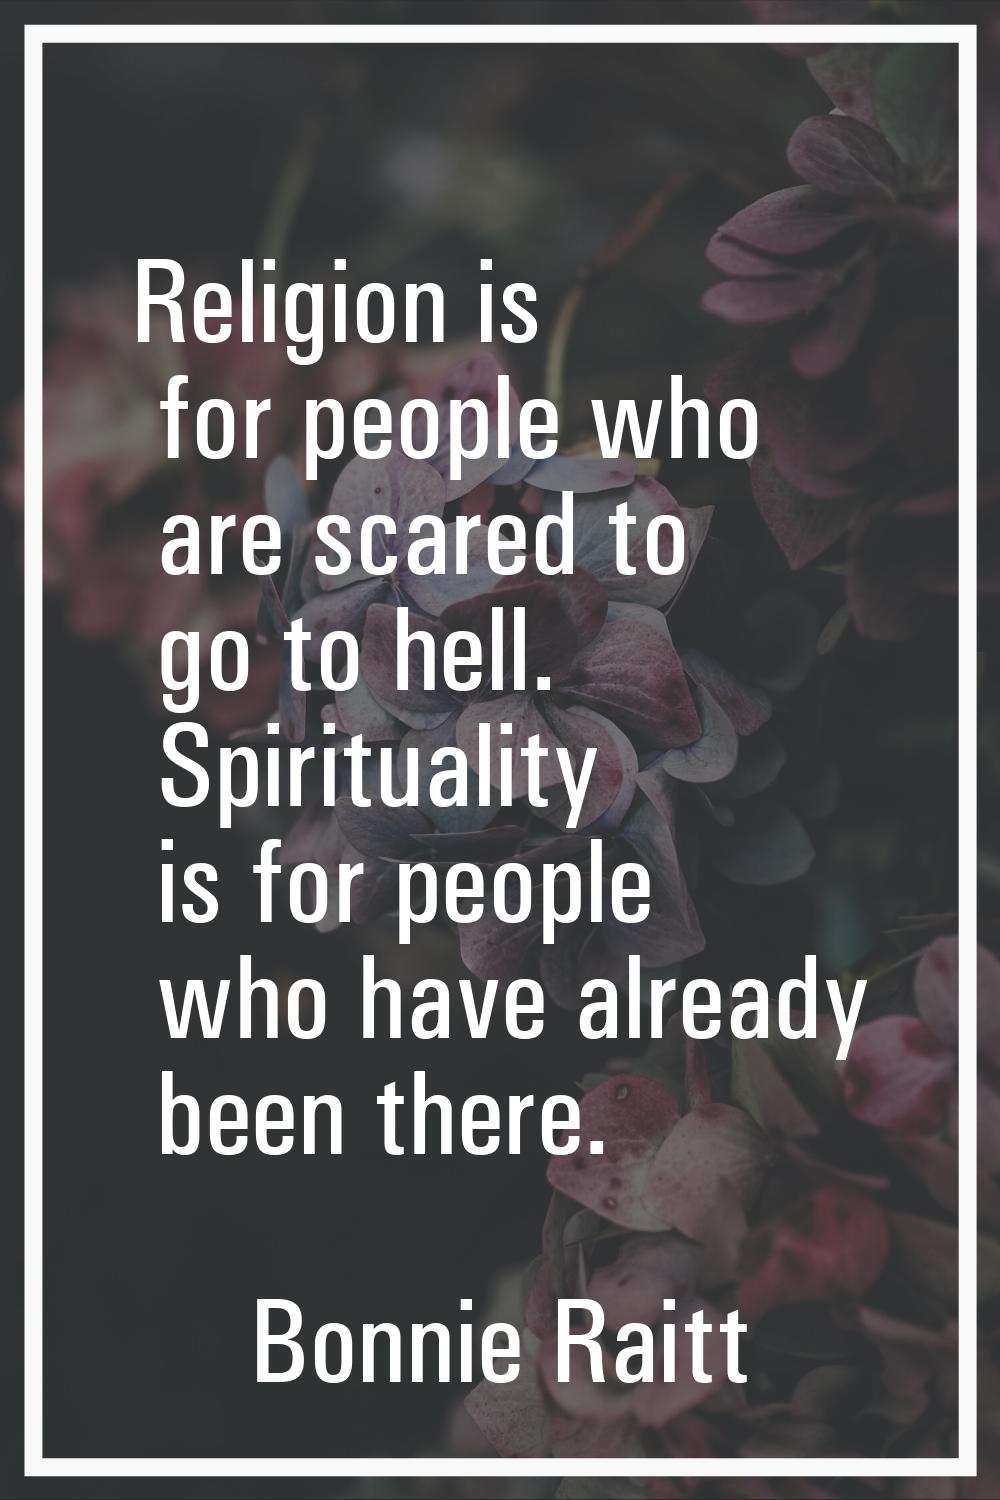 Religion is for people who are scared to go to hell. Spirituality is for people who have already be